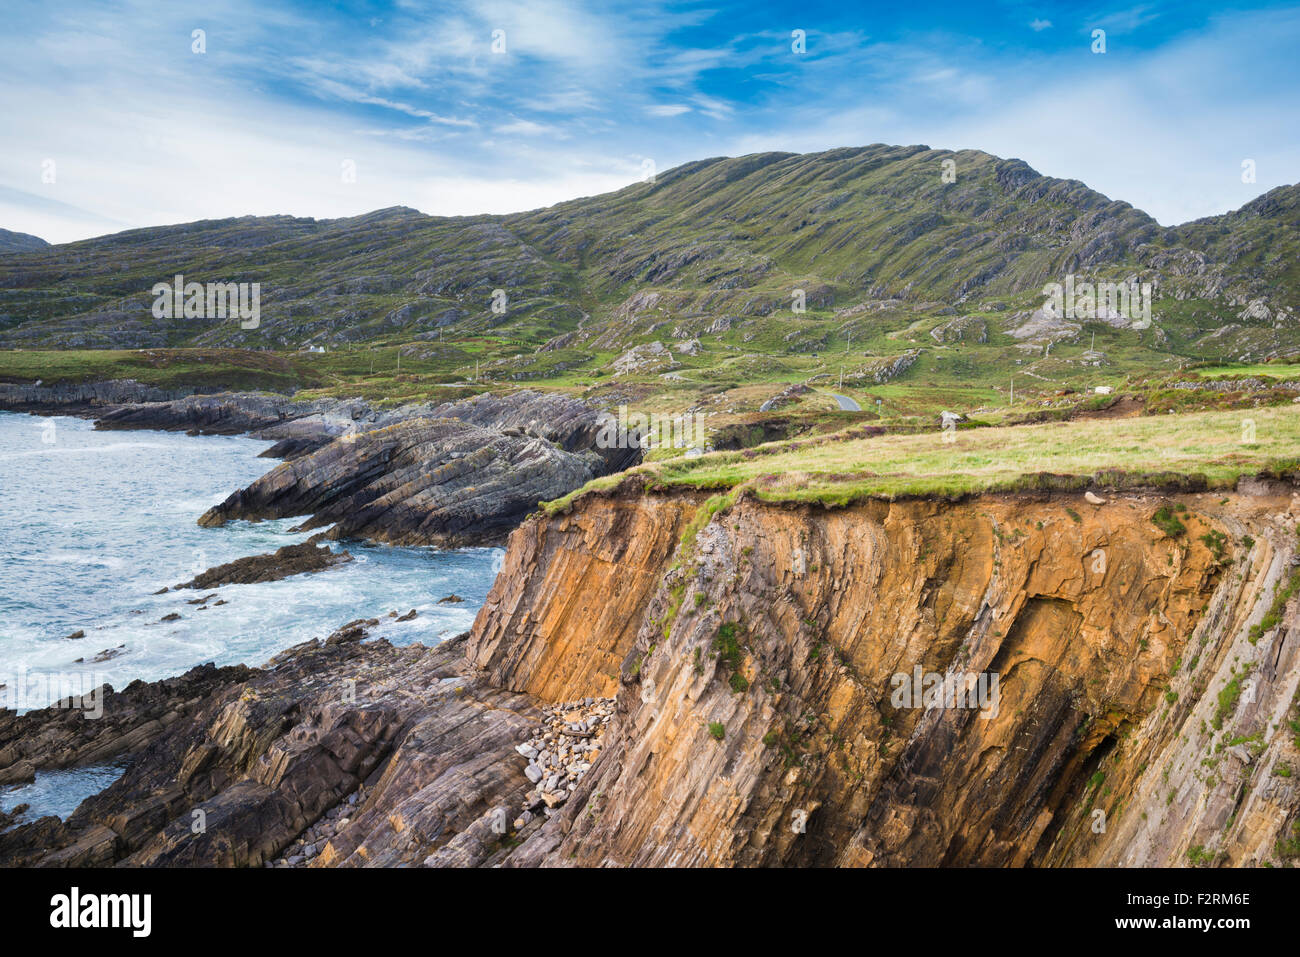 Rocky sea cliffs near Allihies, Beara, County Cork, Ireland, with the Slieve Miskish Mountains in the background Stock Photo